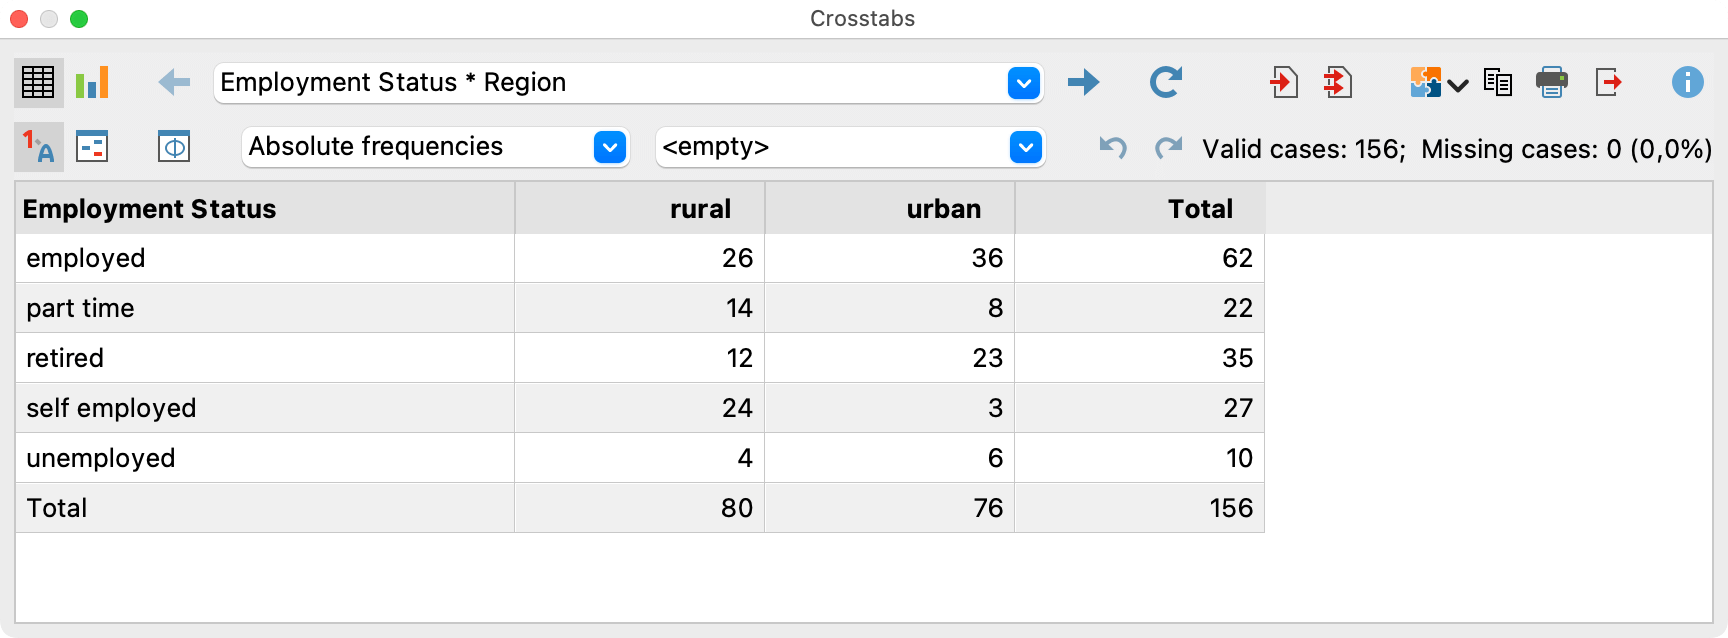 Results table for the function “Crosstabs”